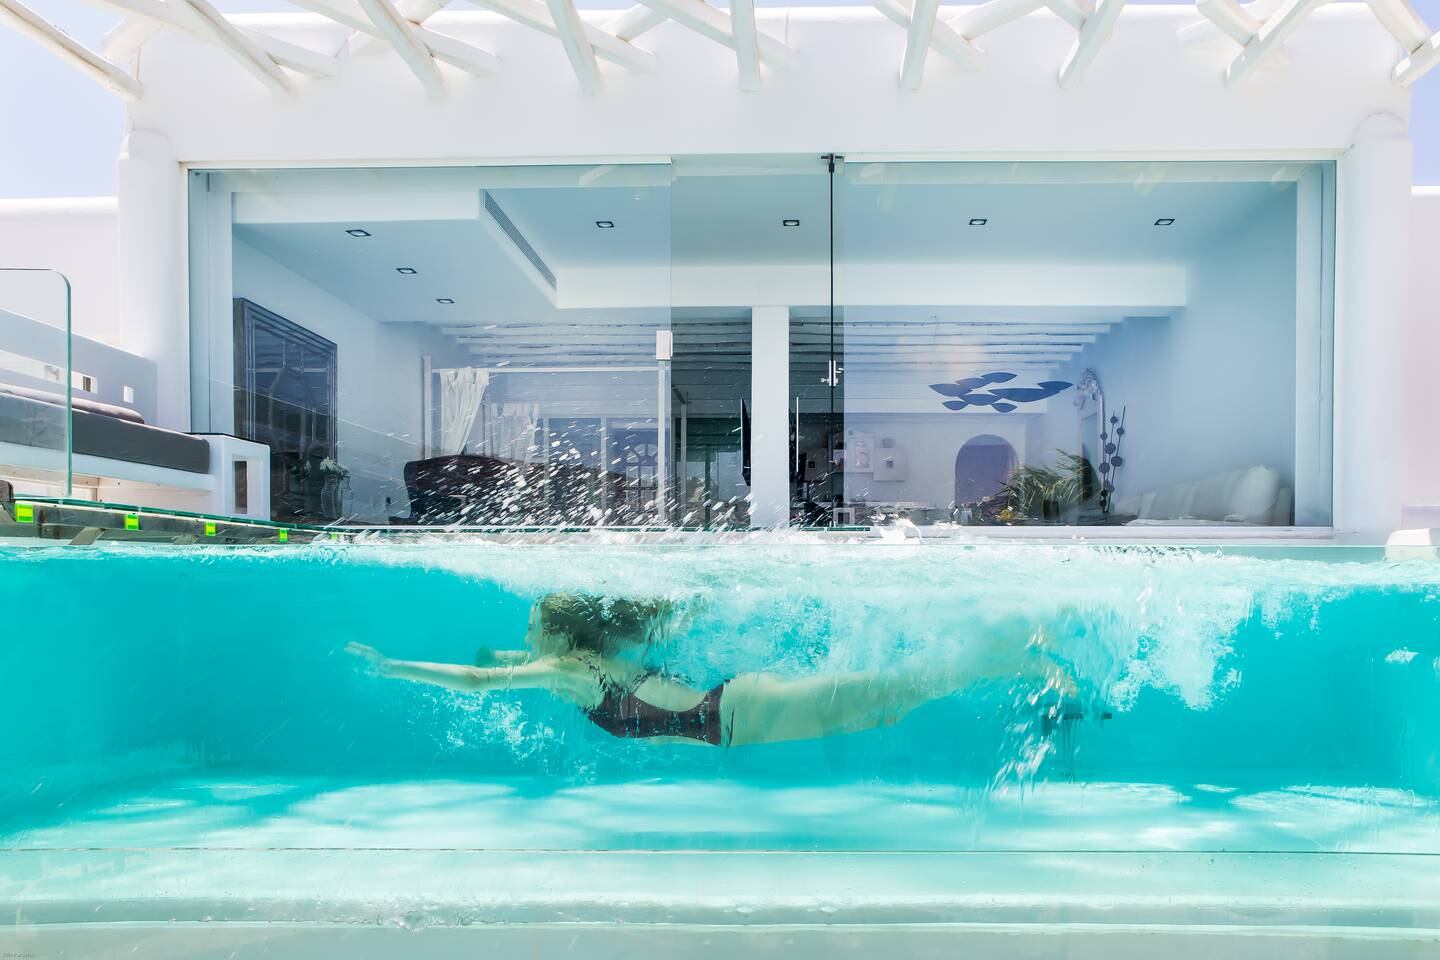 Some suites come with glass-fronted pools. Photo: Kivotos Mykonos